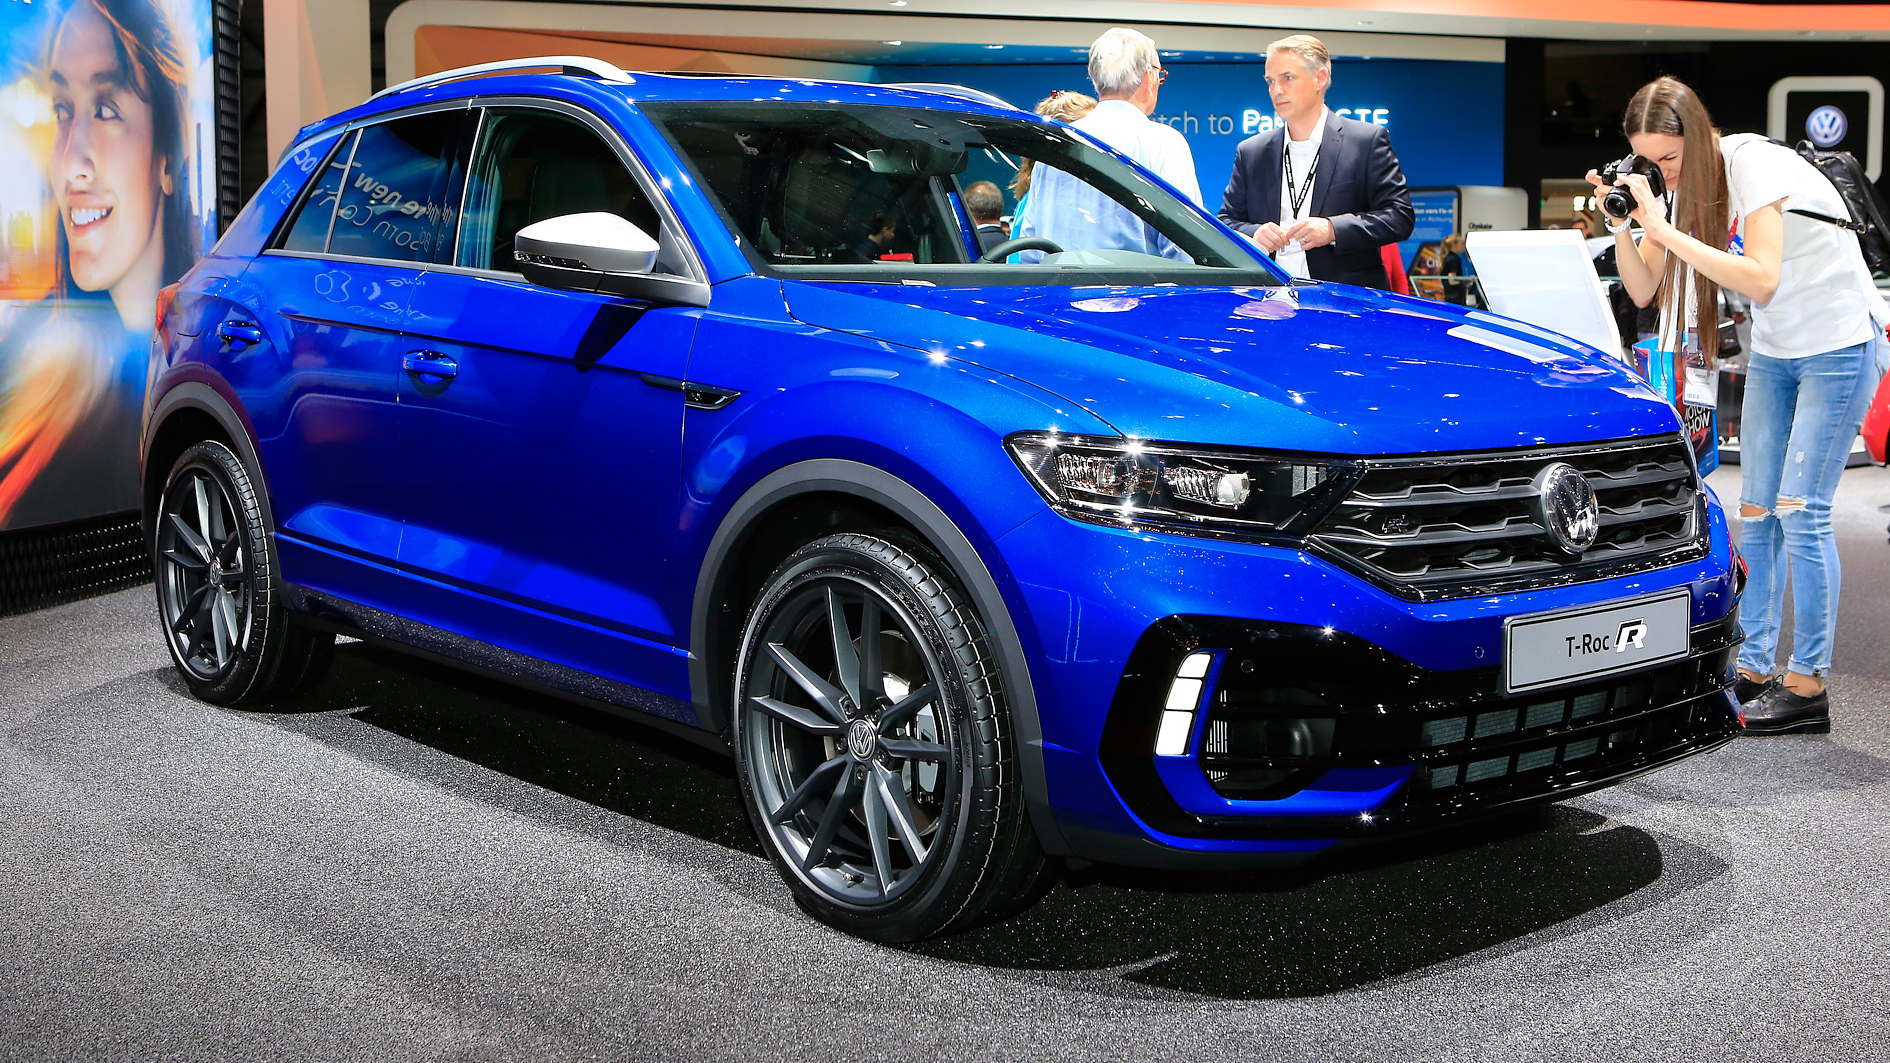 Vw T Roc R Why Australia Misses Out On The Hot Hatch Suv Caradvice